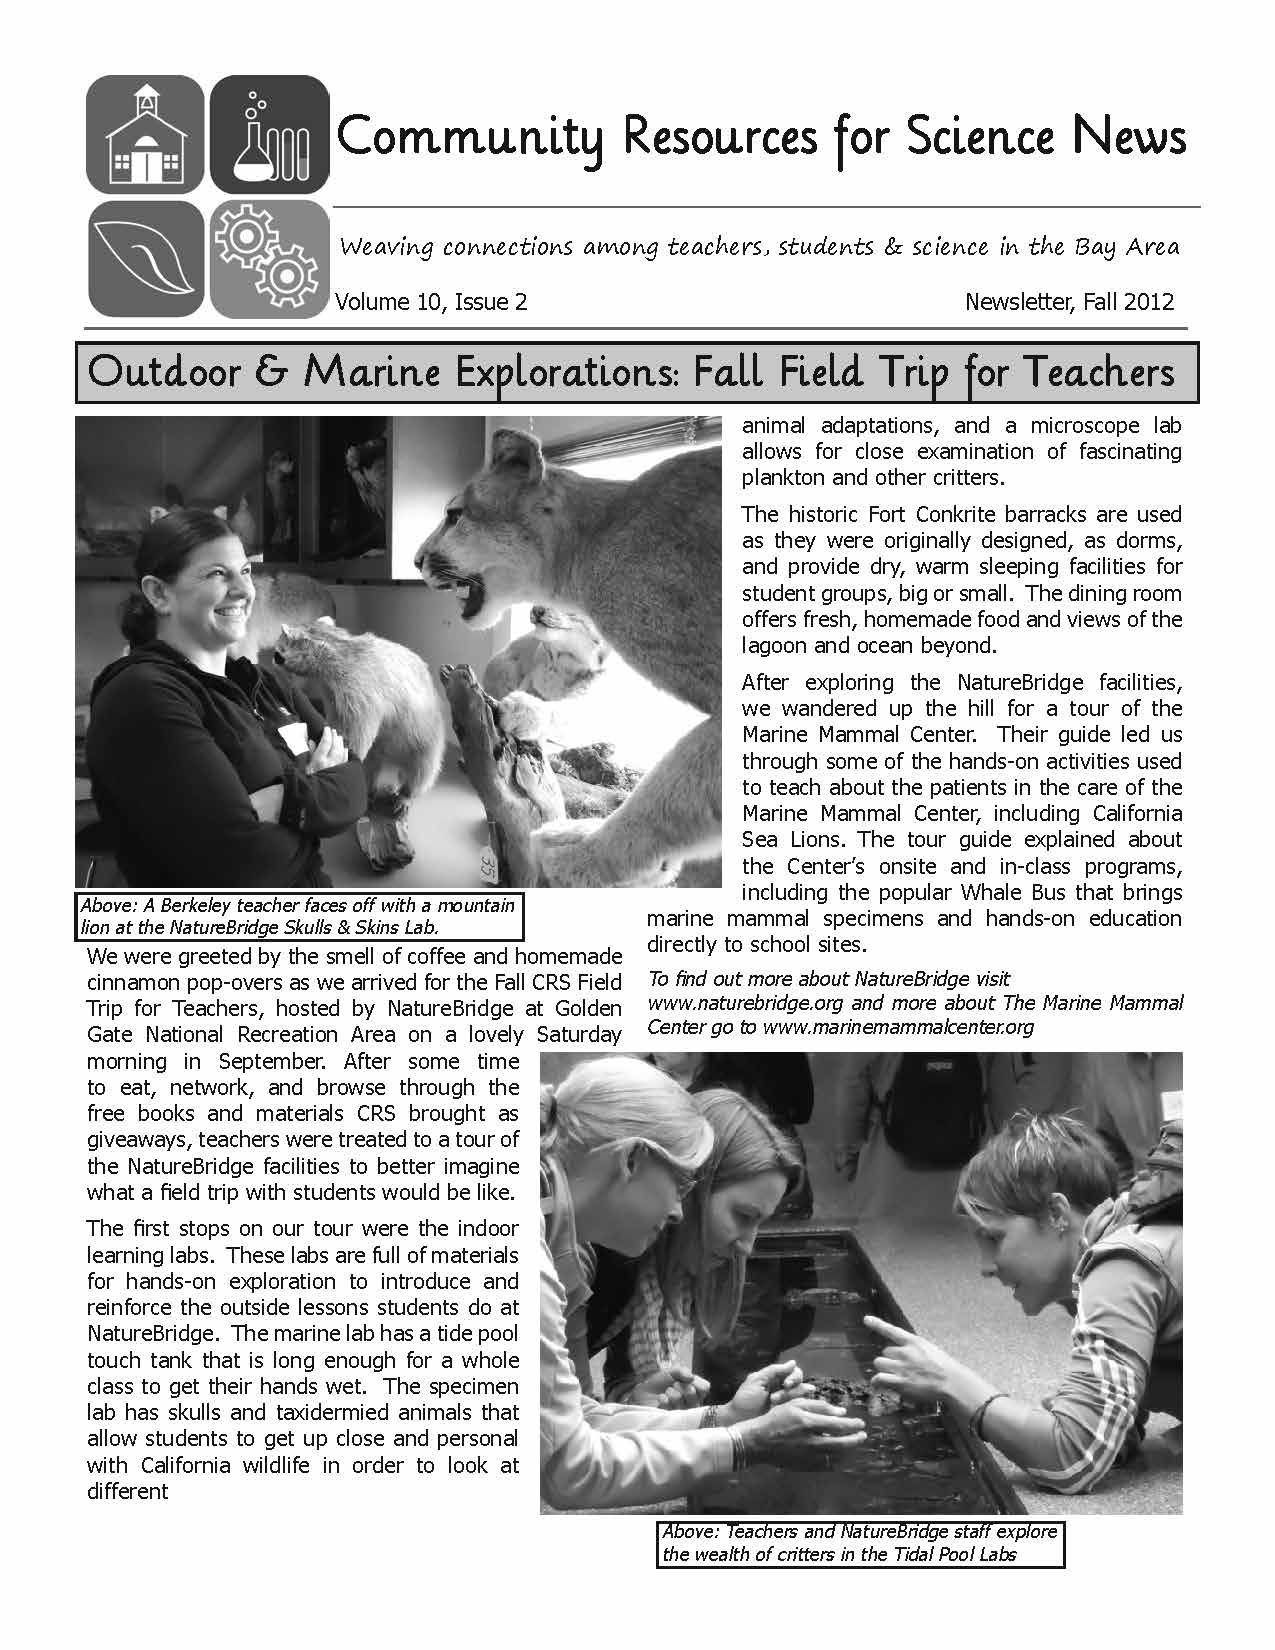 NewsletterFall2012_Page_1